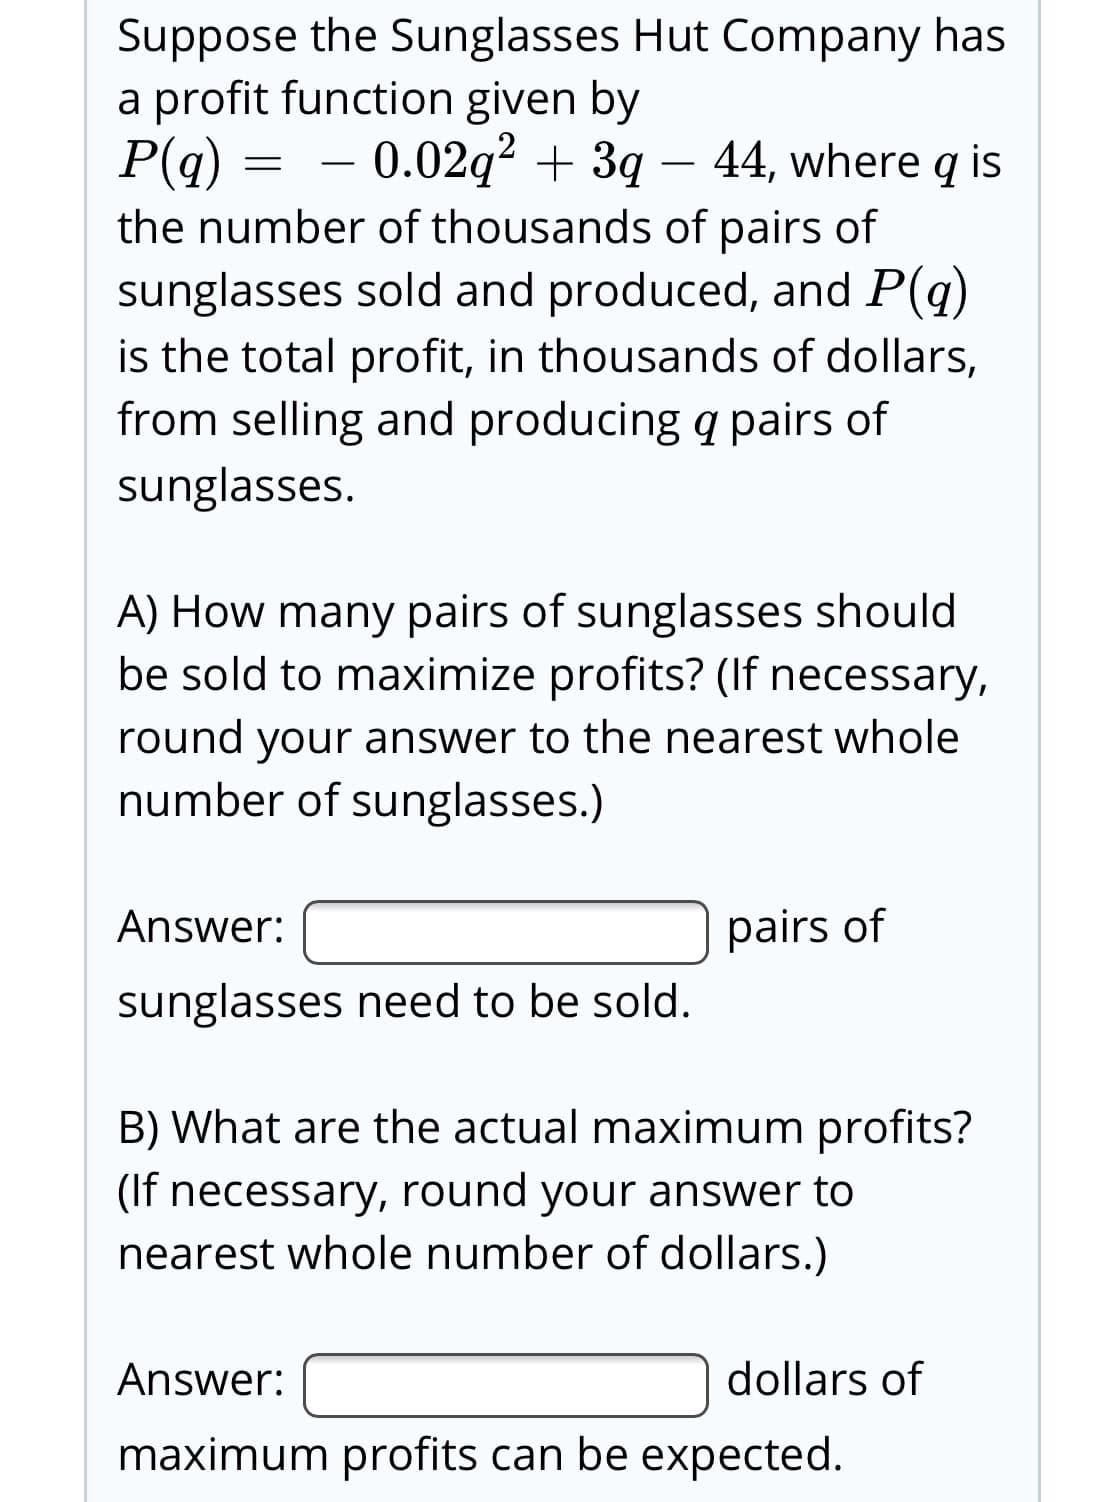 Suppose the Sunglasses Hut Company has
a profit function given by
P(q)
the number of thousands of pairs of
sunglasses sold and produced, and P(q)
is the total profit, in thousands of dollars,
from selling and producing q pairs of
0.02q? + 3g – 44, where q is
sunglasses.
A) How many pairs of sunglasses should
be sold to maximize profits? (If necessary,
round your answer to the nearest whole
number of sunglasses.)
Answer:
pairs of
sunglasses need to be sold.
B) What are the actual maximum profits?
(If necessary, round your answer to
nearest whole number of dollars.)
Answer:
dollars of
maximum profits can be expected.
